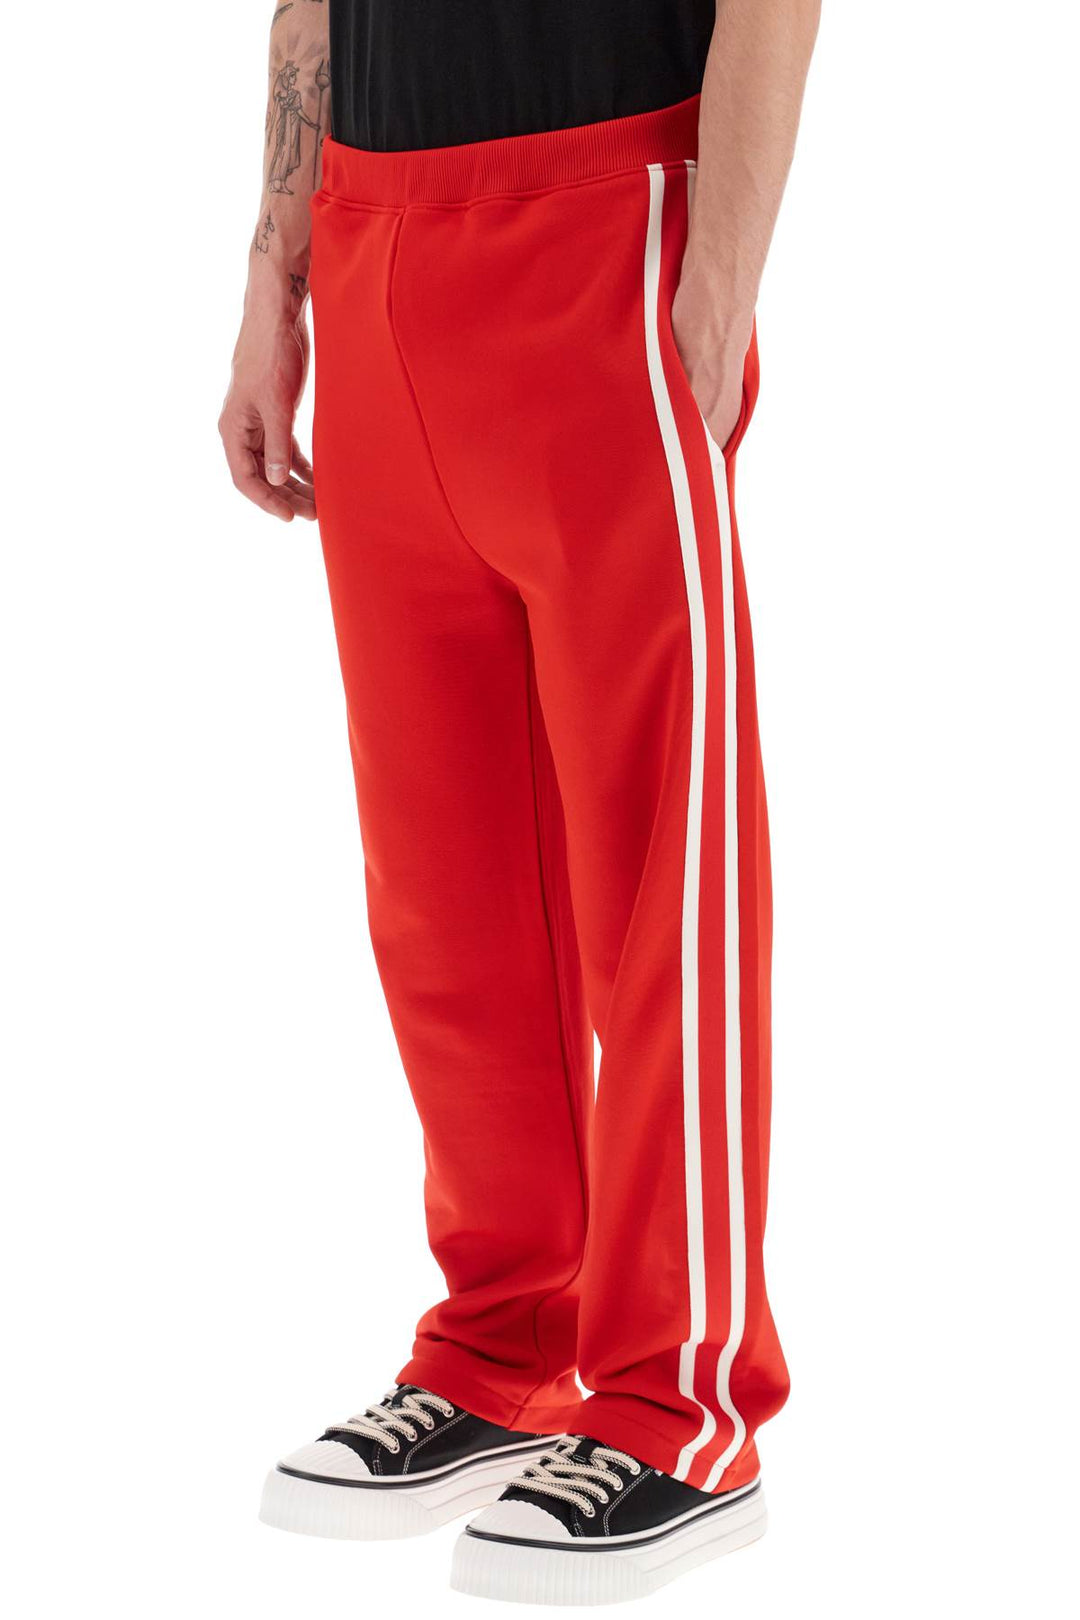 Ami paris track pants with side bands-3